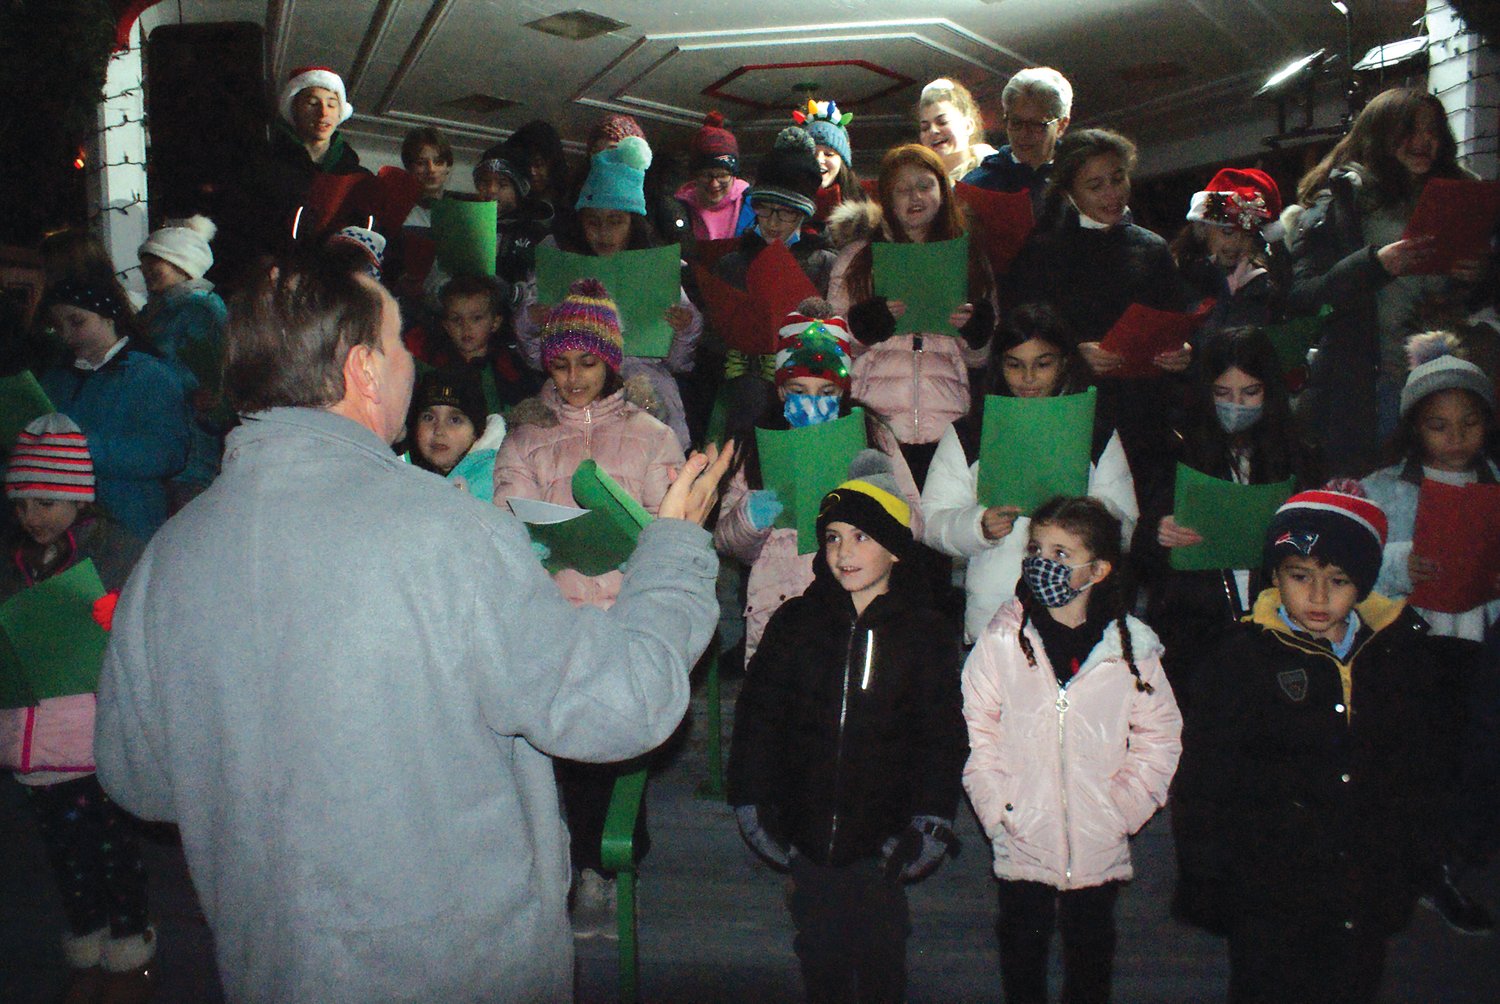 SONGS OF THE SEASON: Singing songs of the season
during the 7th annual Knightsville Gazebo Christmas tree
lighting were members of the Bain Middle School Chorus, under
the direction of Mr. Perry.